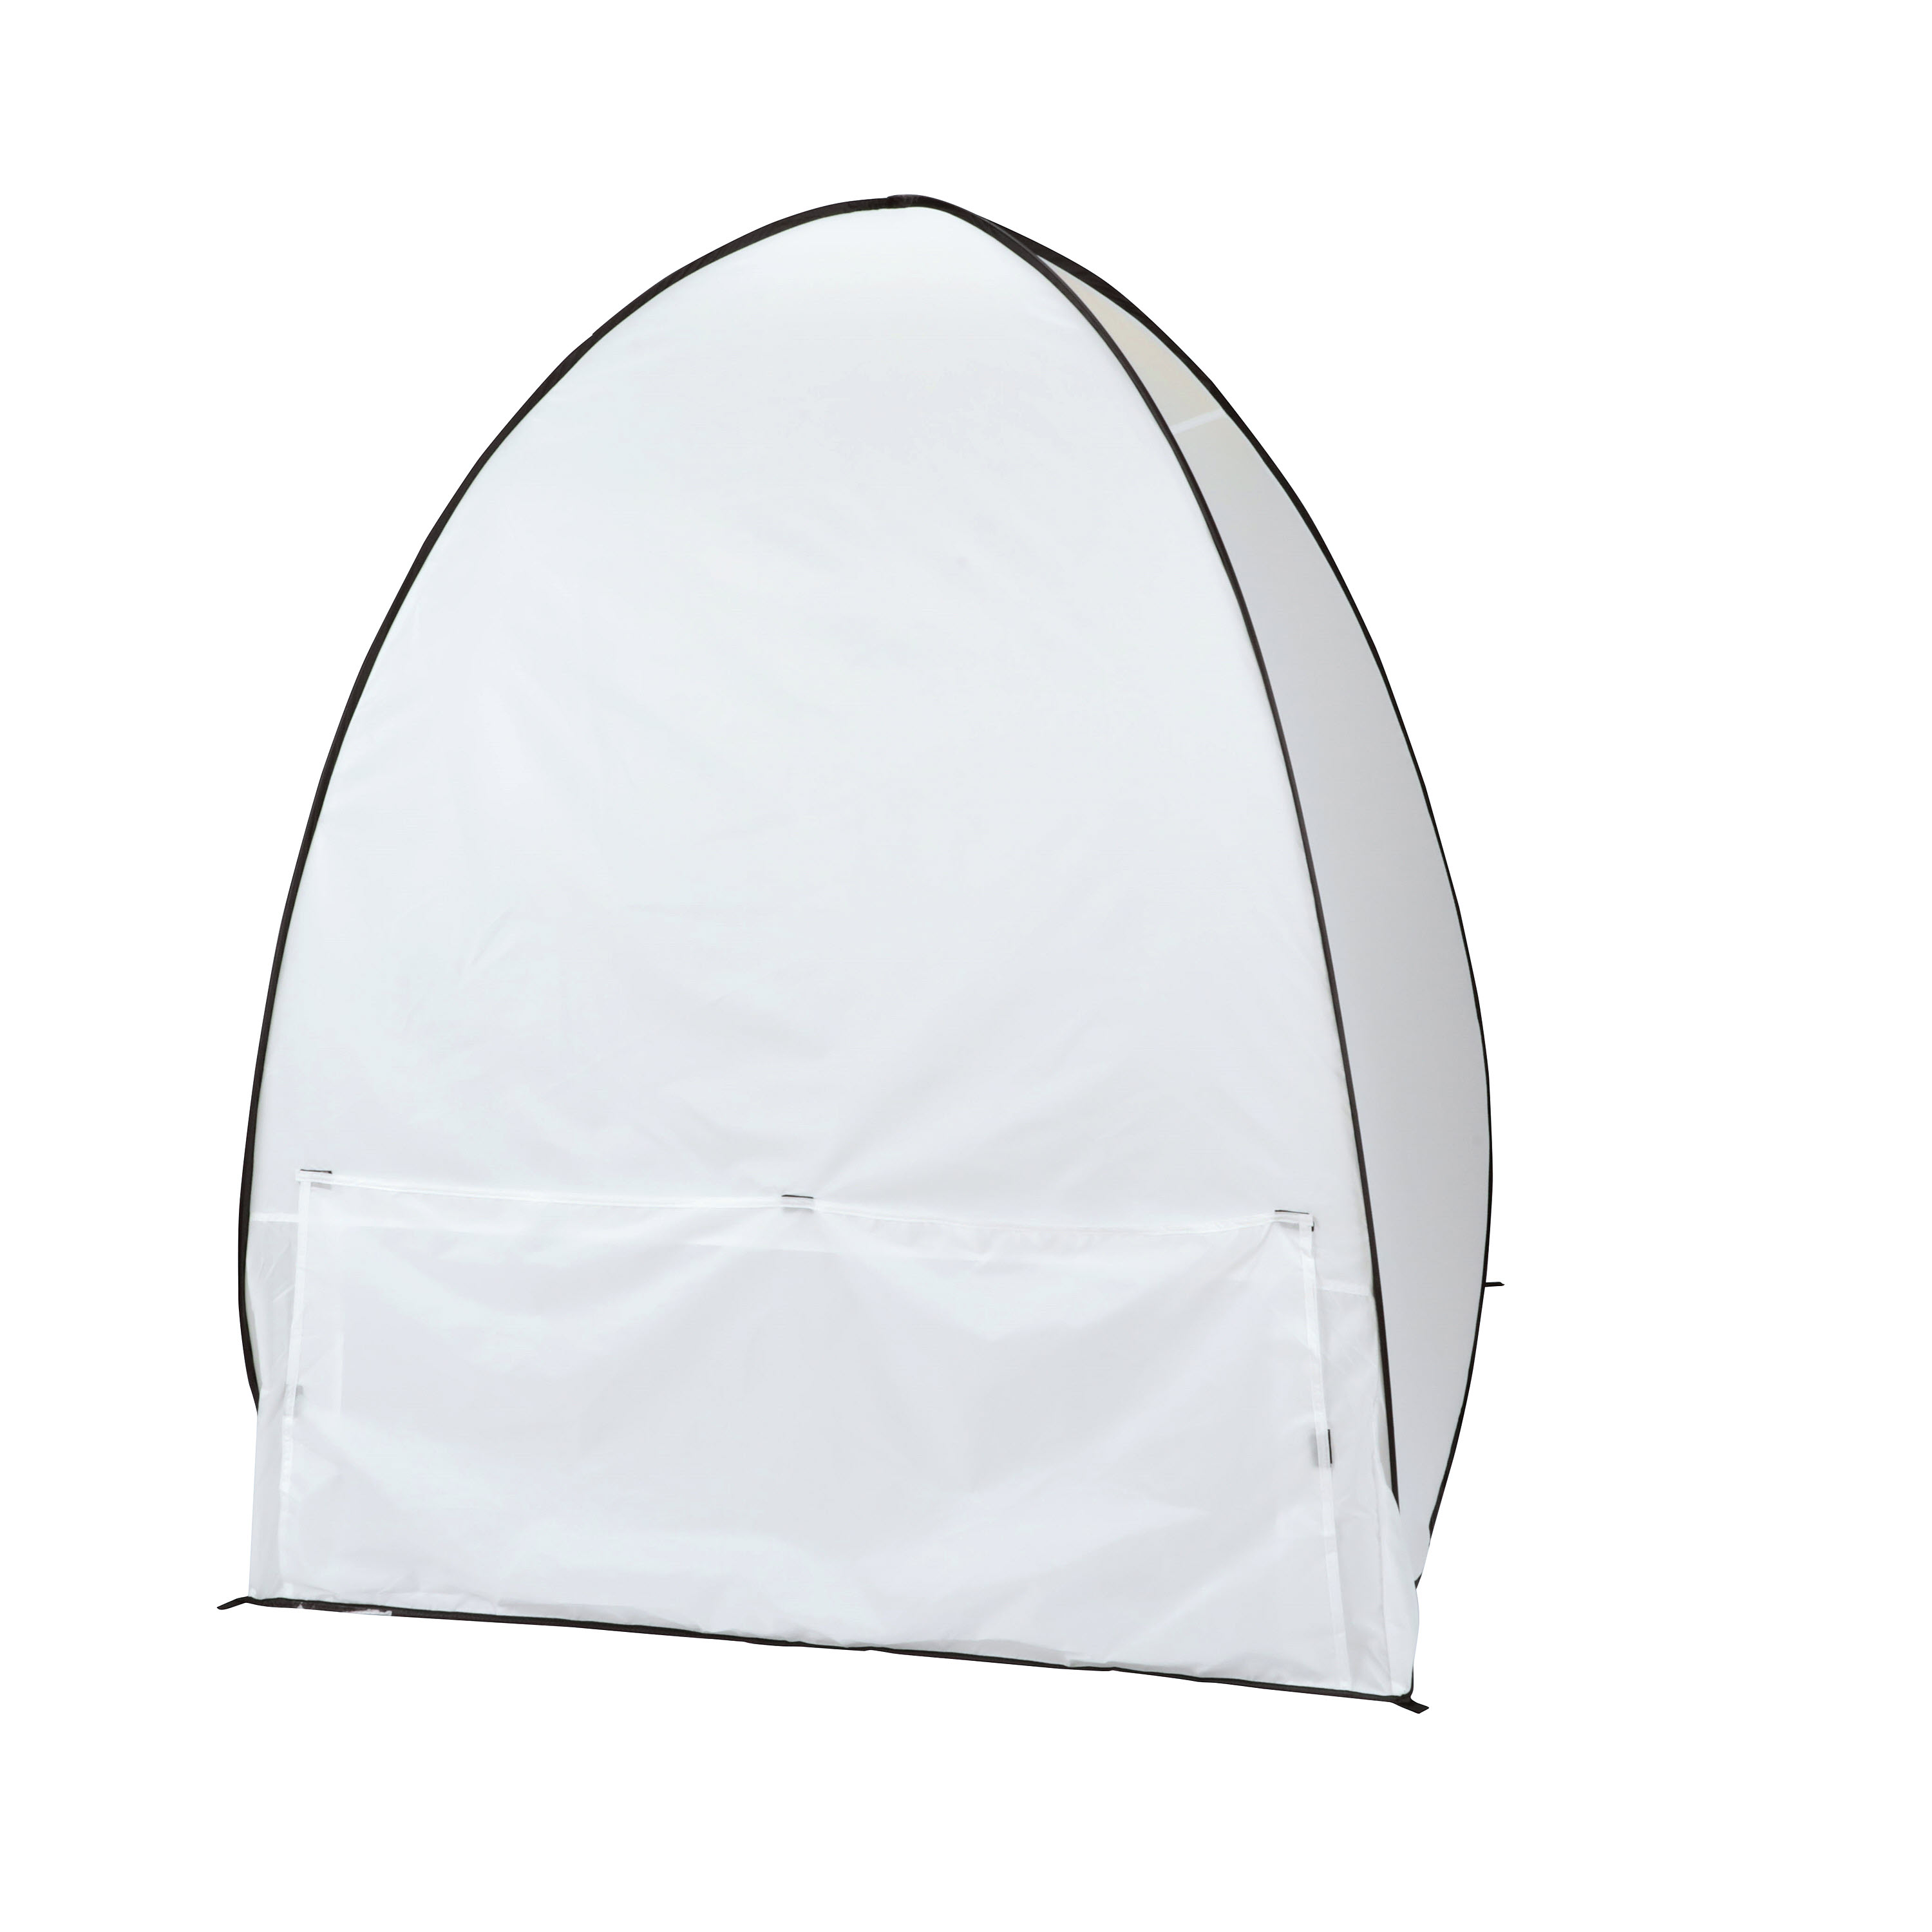  PLANTIONAL Portable Paint Tent For Spray Painting